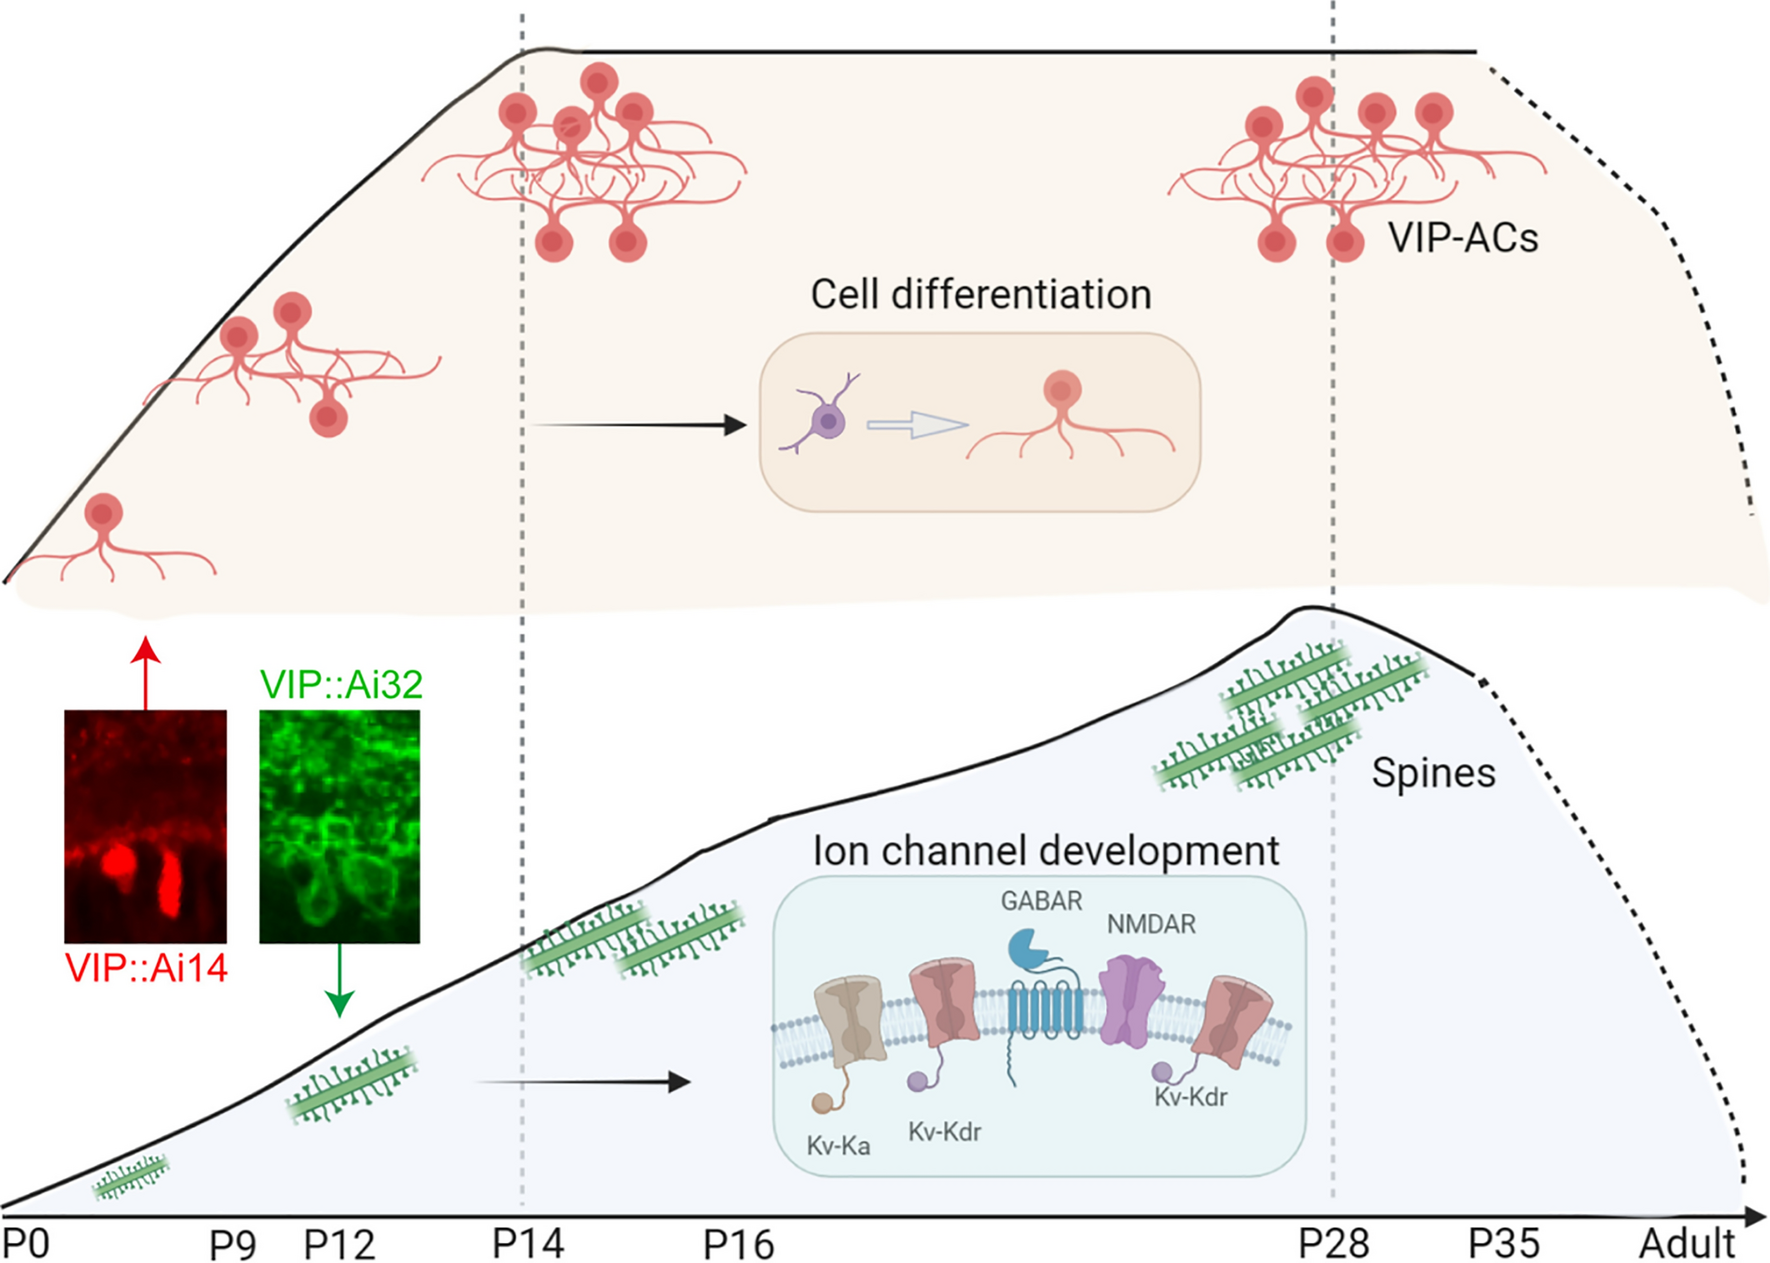 Characterization of Retinal VIP-Amacrine Cell Development During the Critical Period